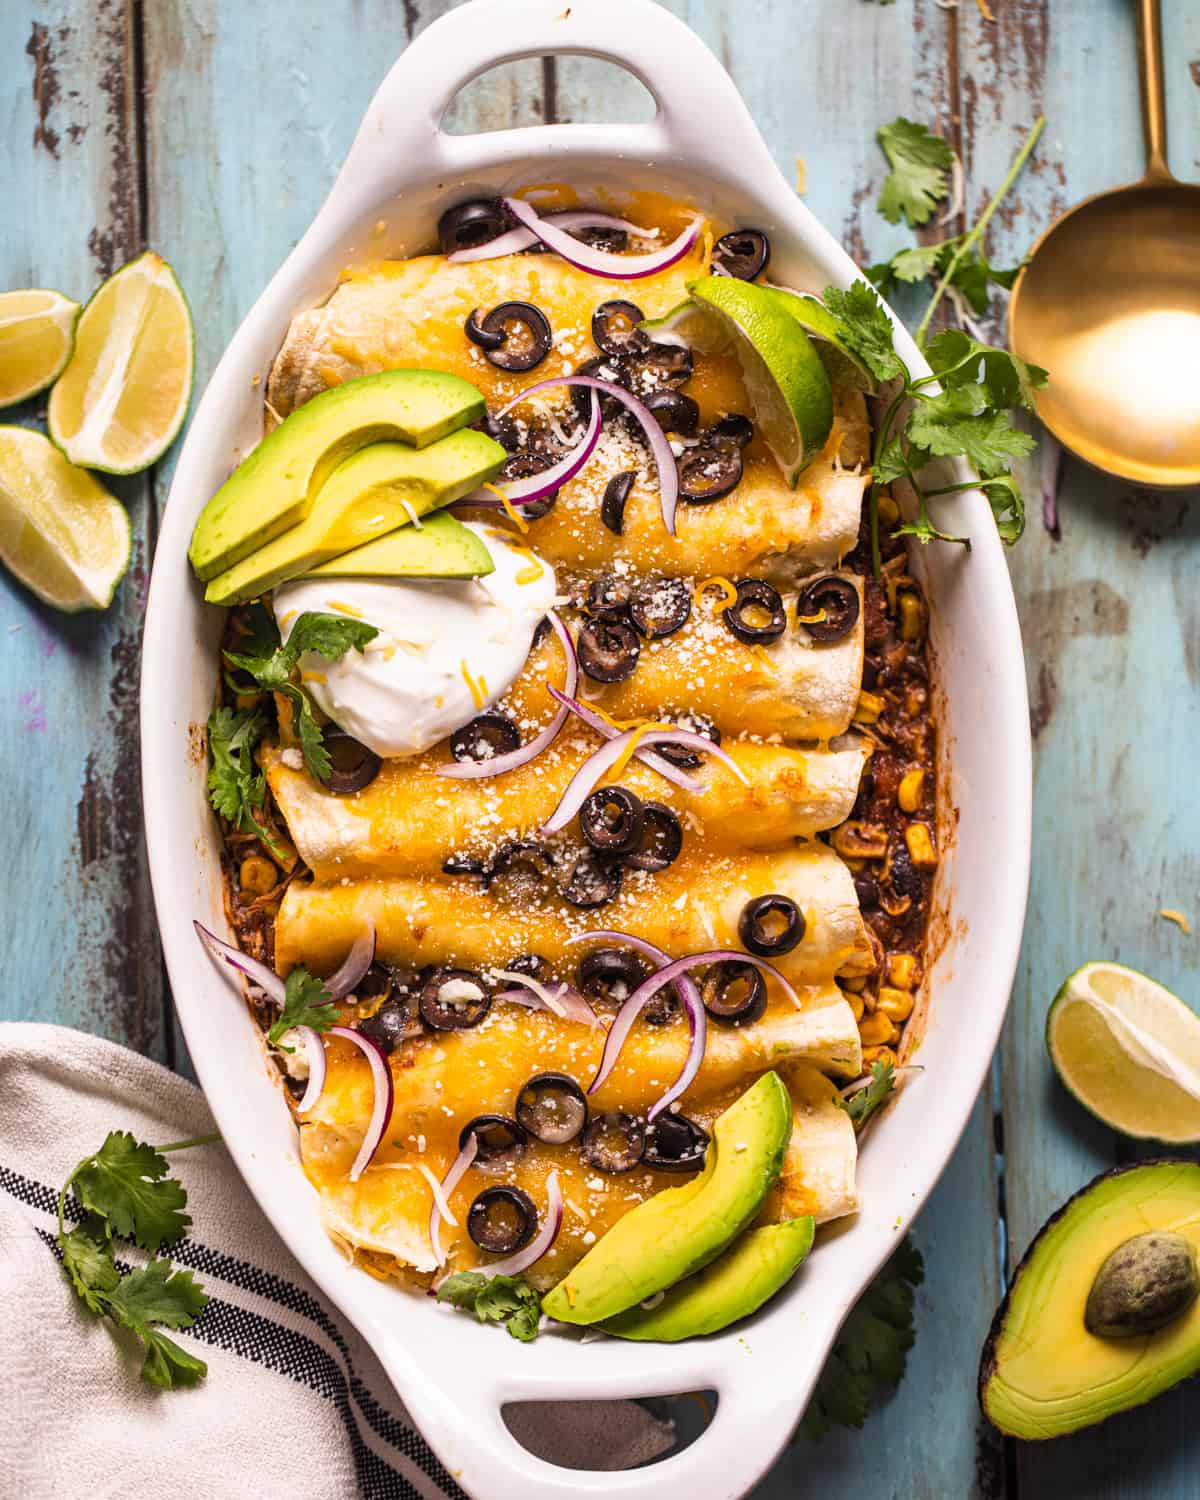 chicken enchiladas in a casserole dish garnished with sour cream, avocado, and olives.